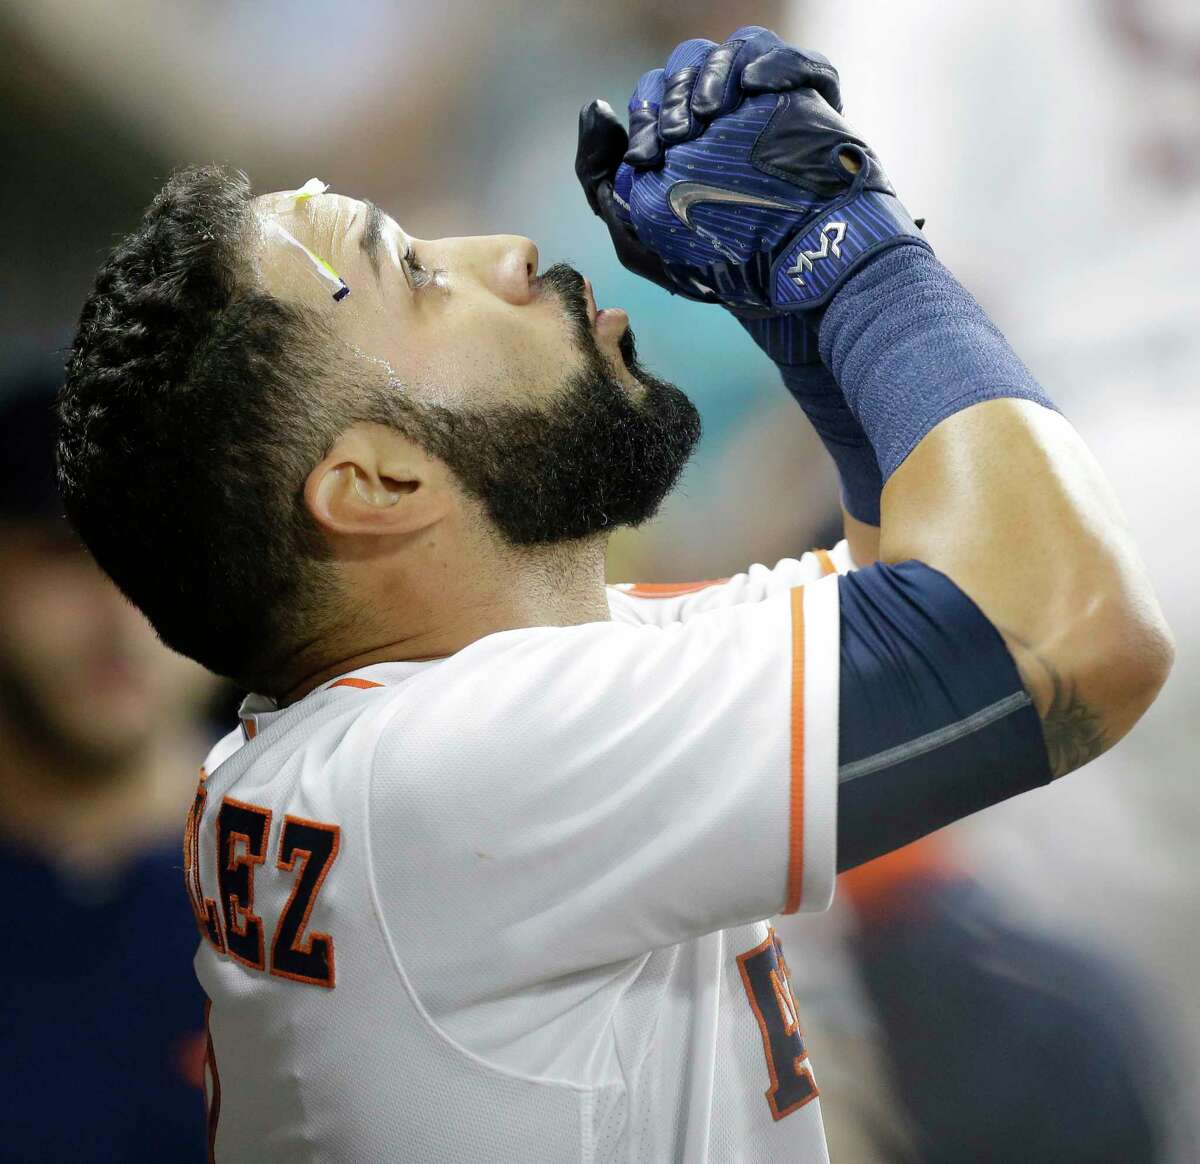 Marwin Gonzalez is so versatile that the deep Astros can rest players at will and insert Gonzalez into the lineup.